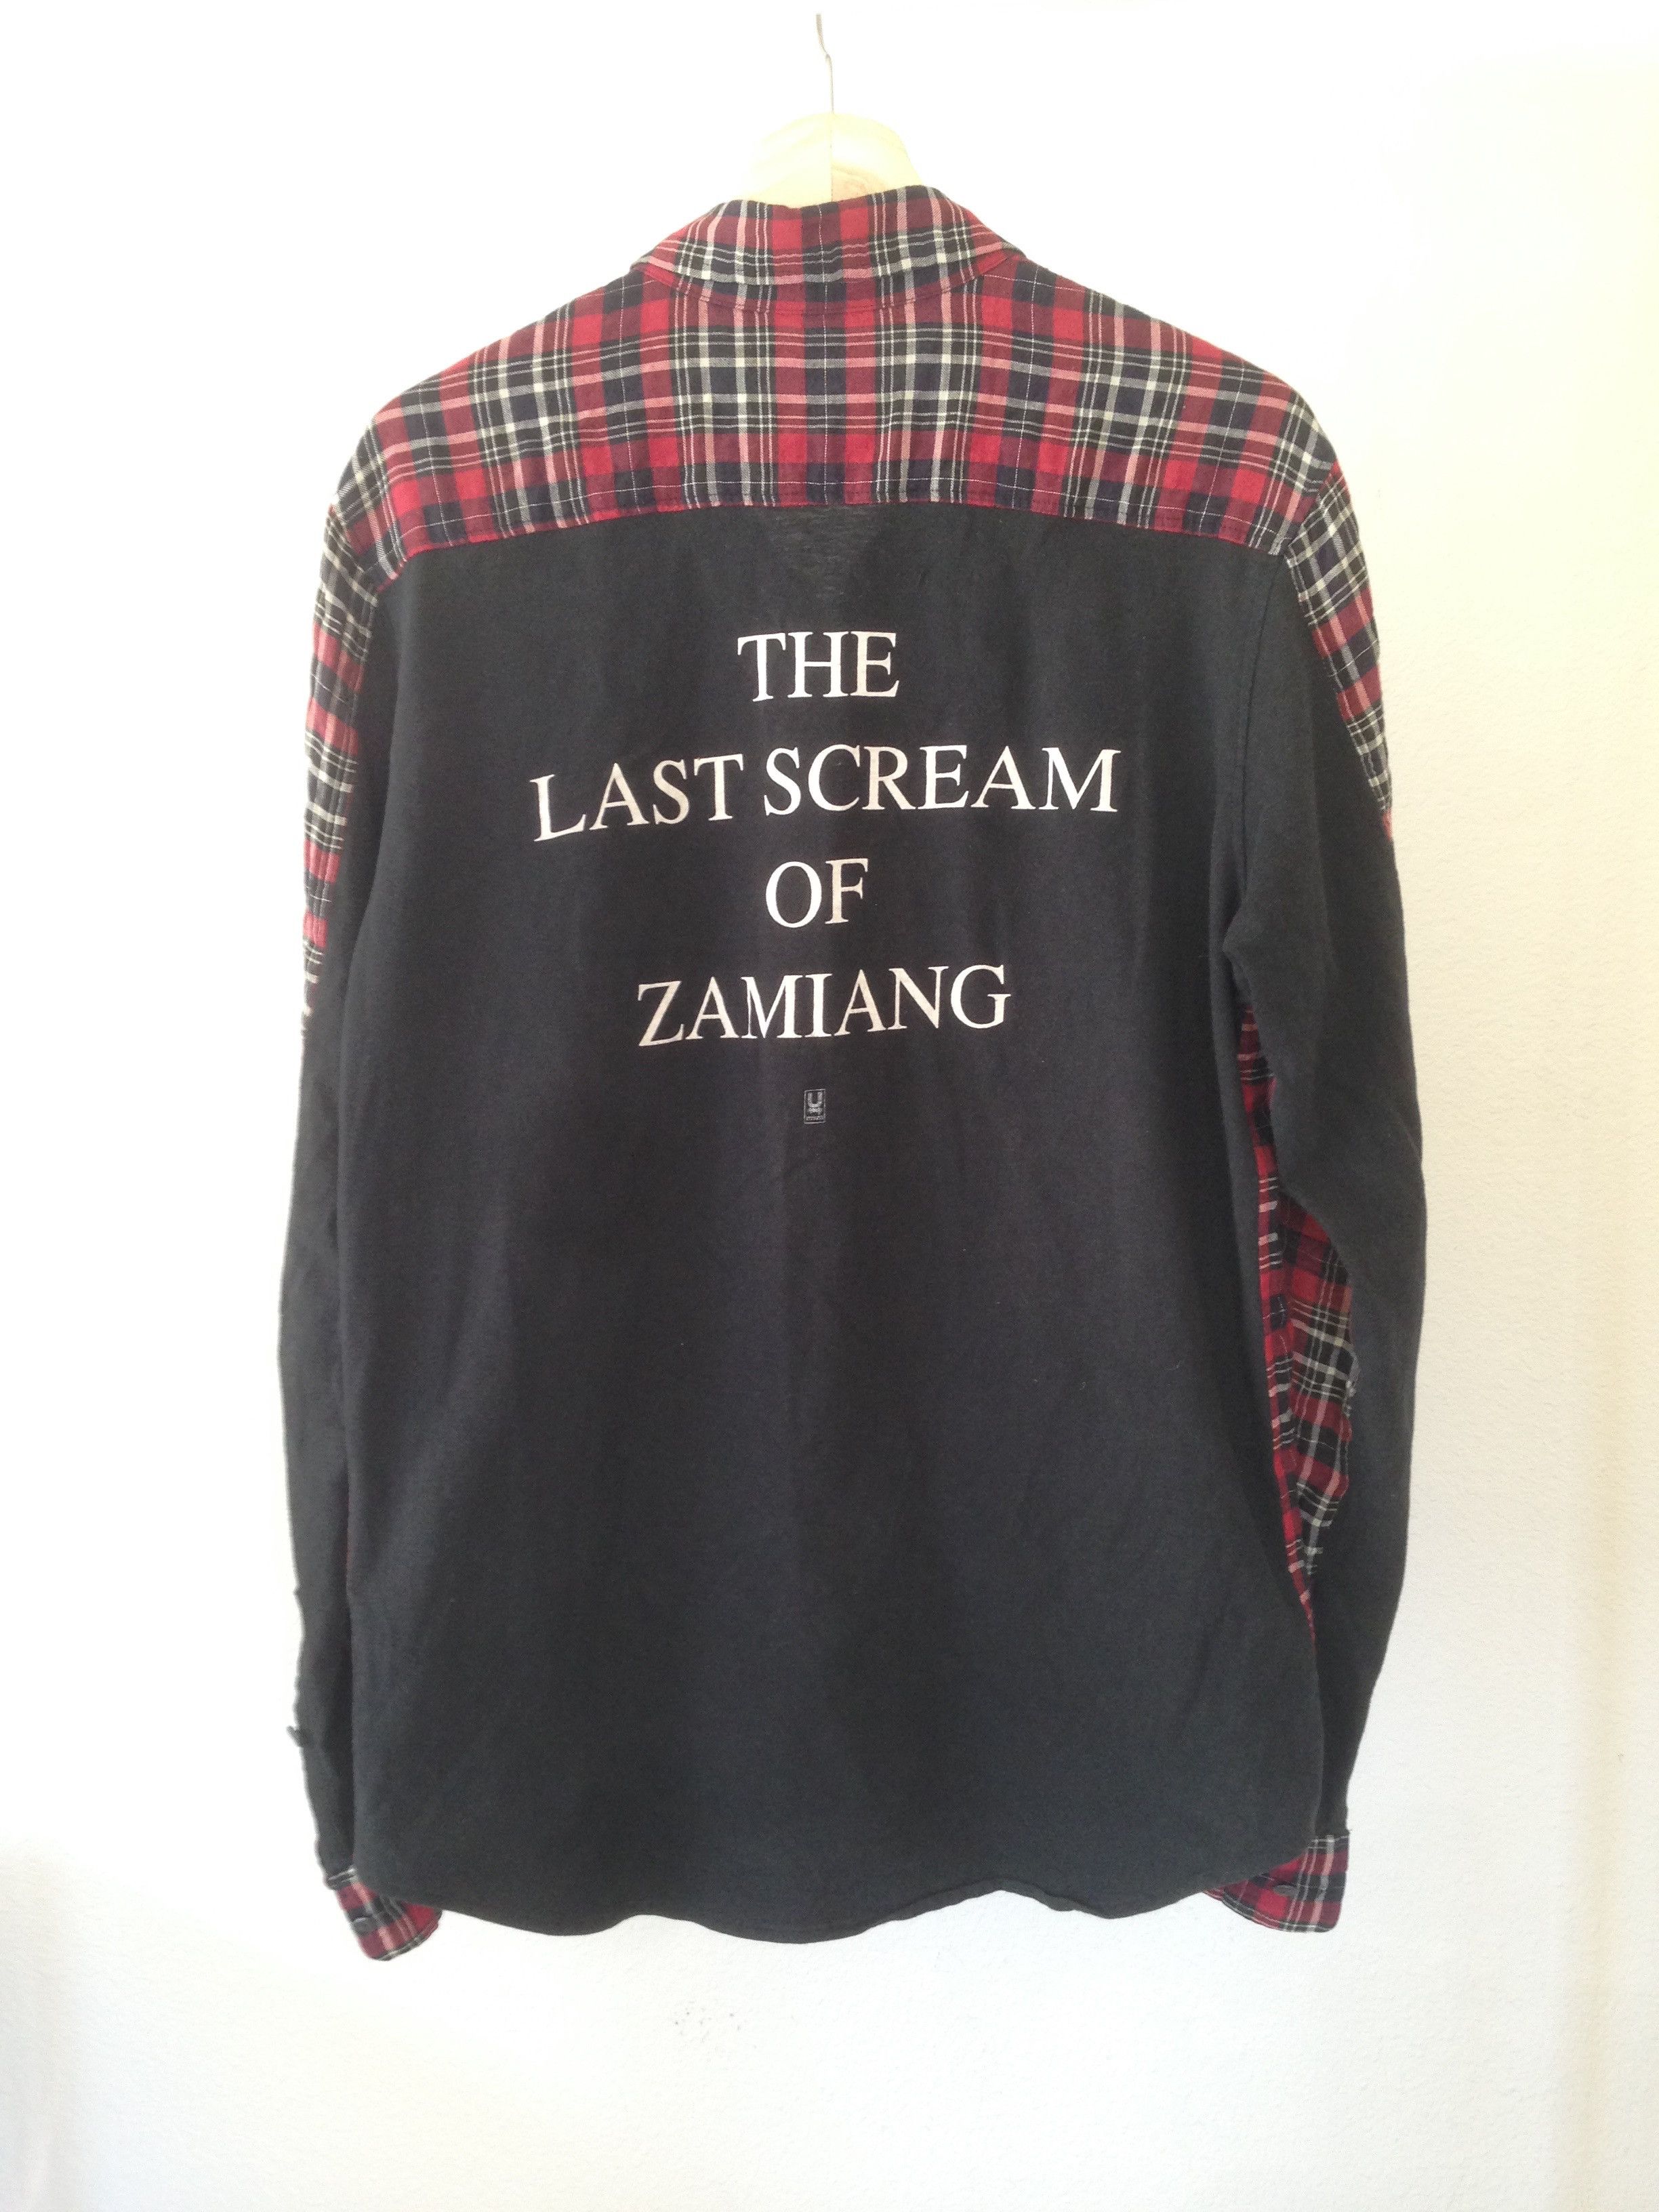 Undercover S/S 2006 "Last Scream of Zamiang" Shirt Size US L / EU 52-54 / 3 - 1 Preview